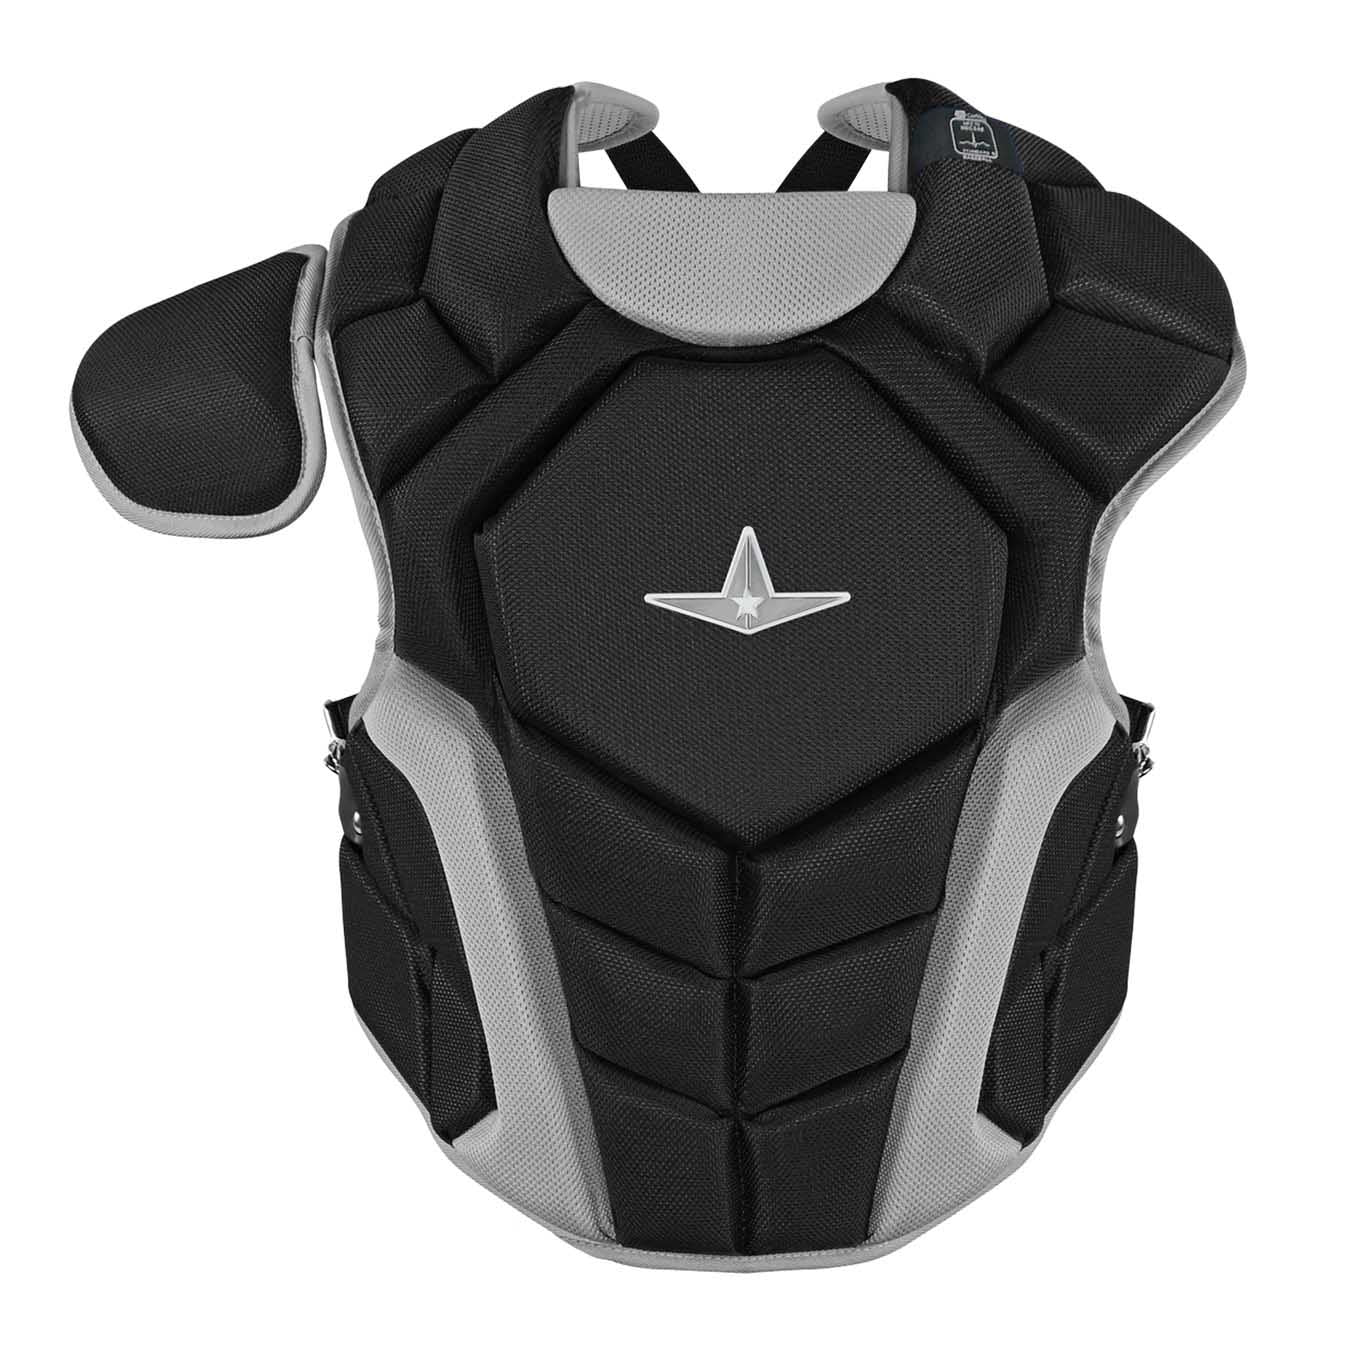 All-Star Top Star Chest Protector CPCC-TS-912 Ages 9-12 14.5"